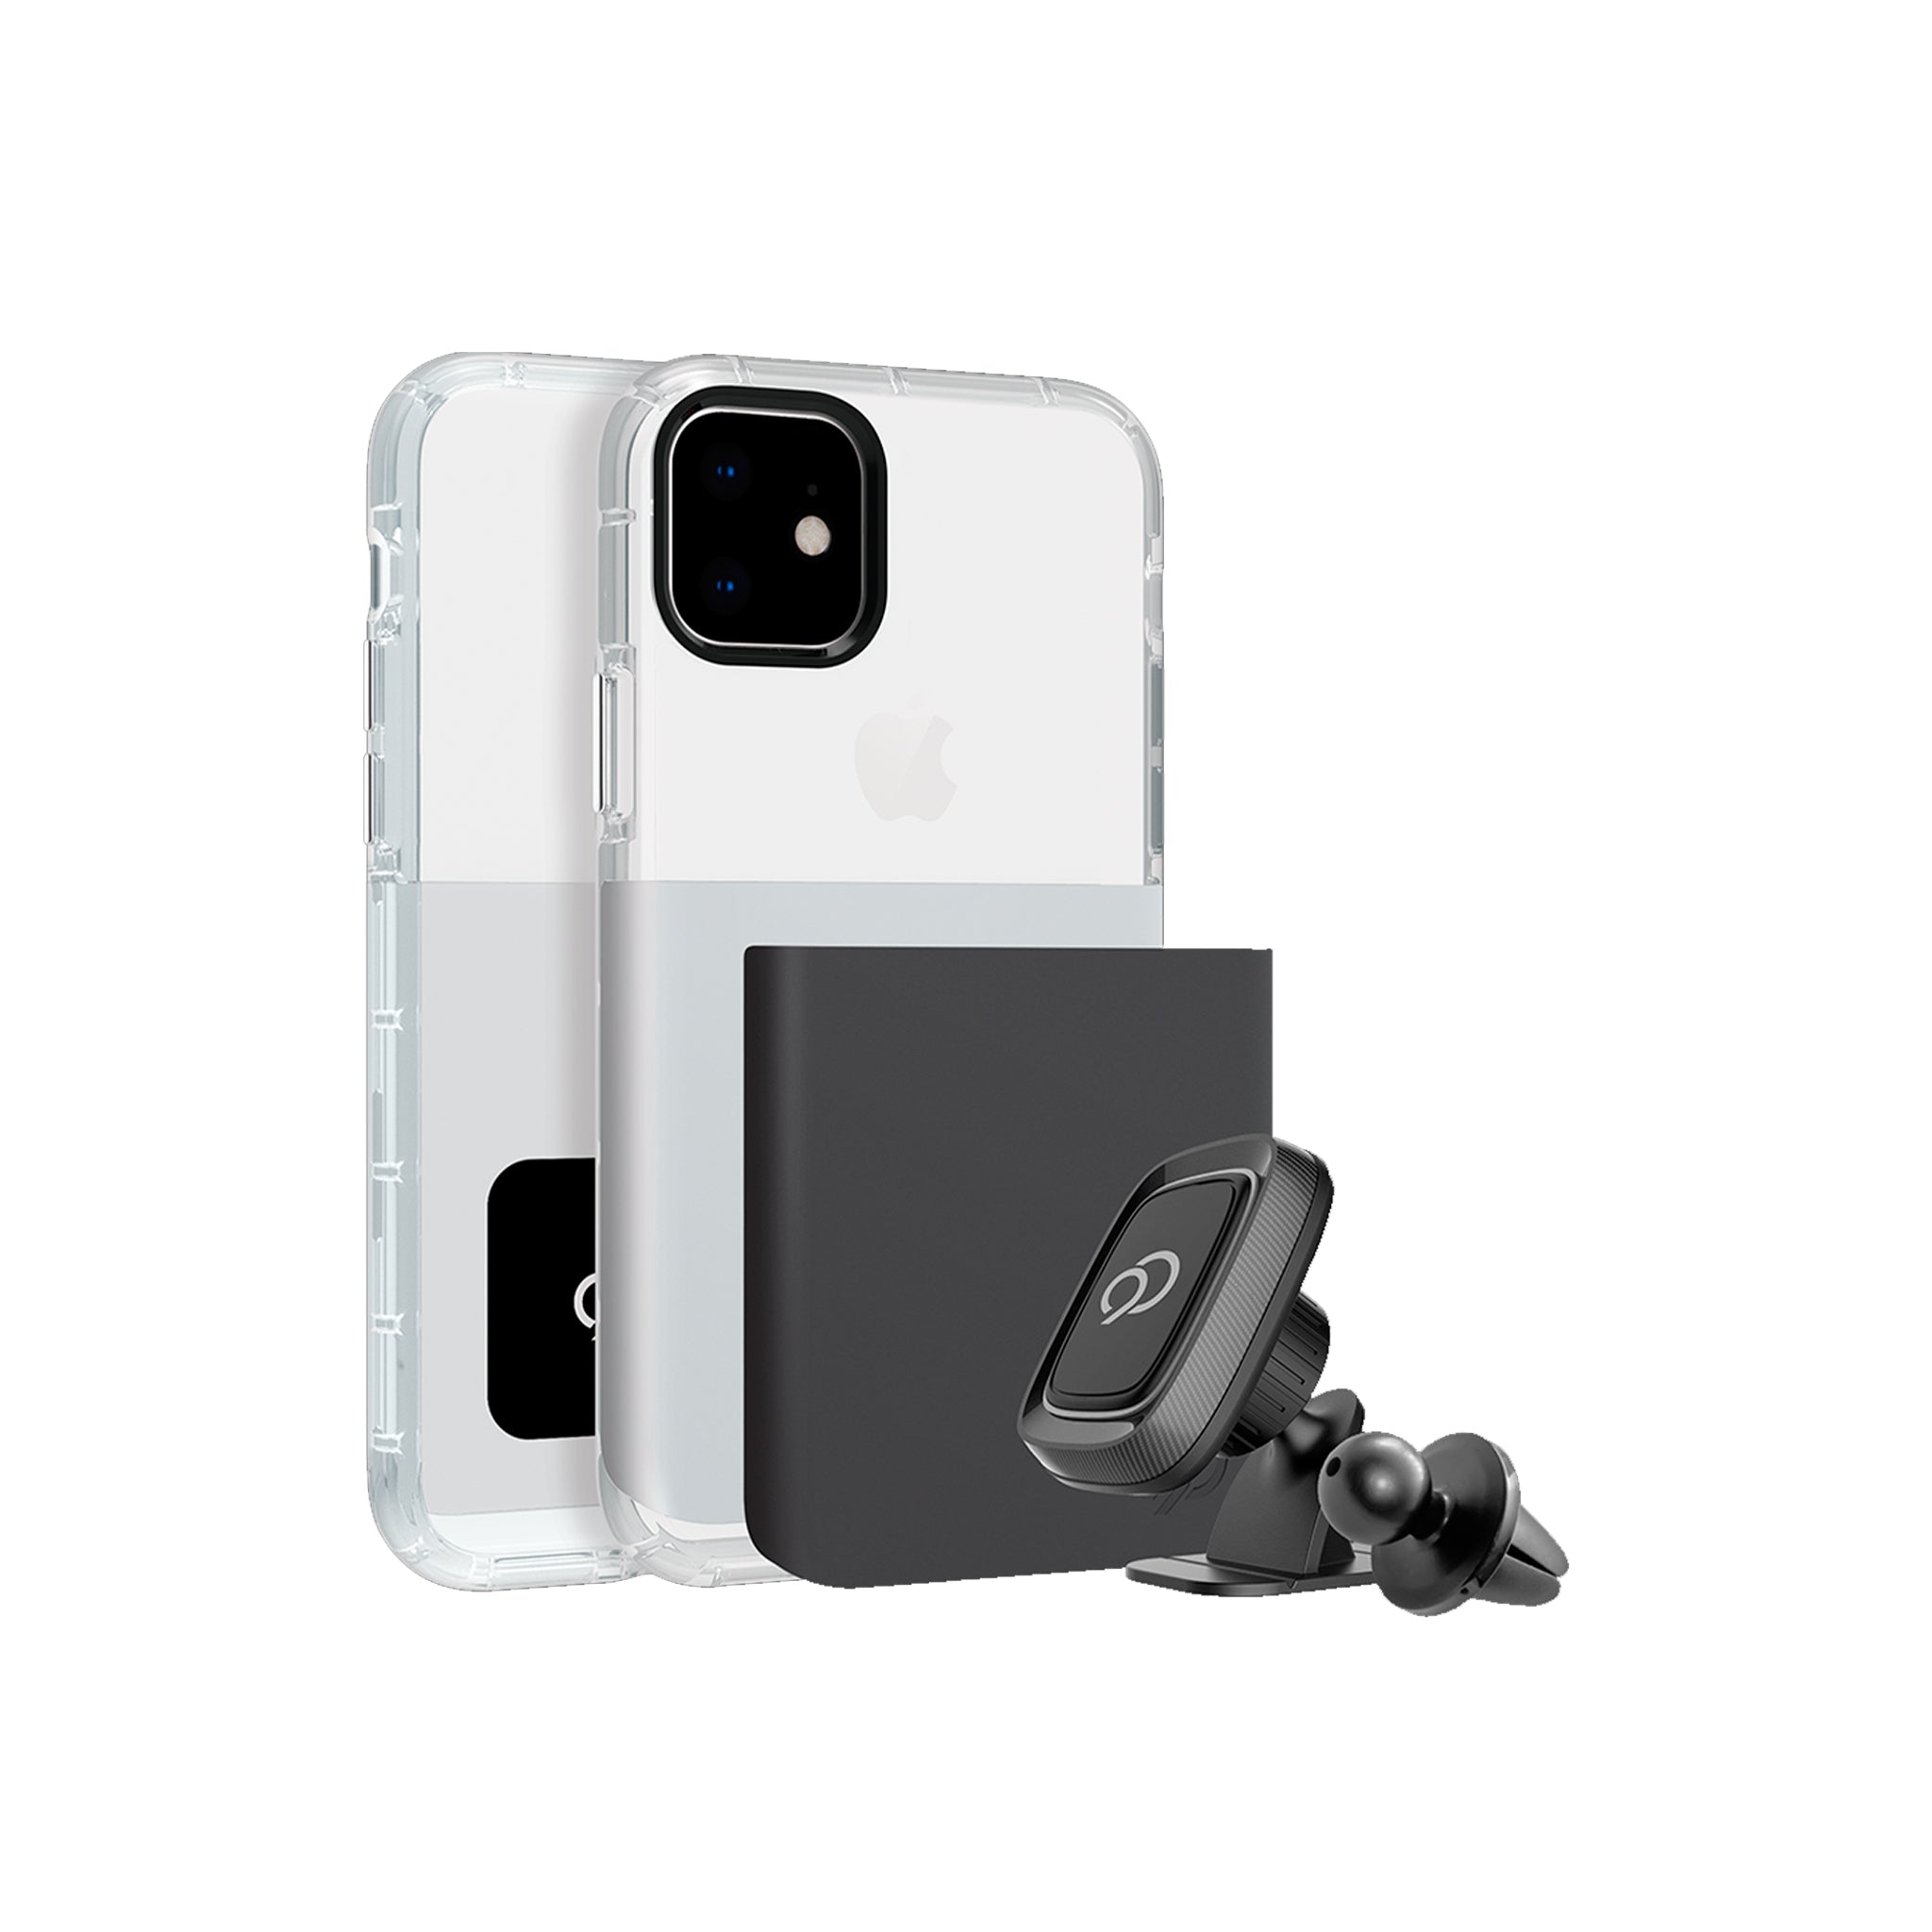 Nimbus9 - Ghost 2 Pro Case With Mount For Apple Iphone 11 / Xr - Gunmetal Gray And Pure White